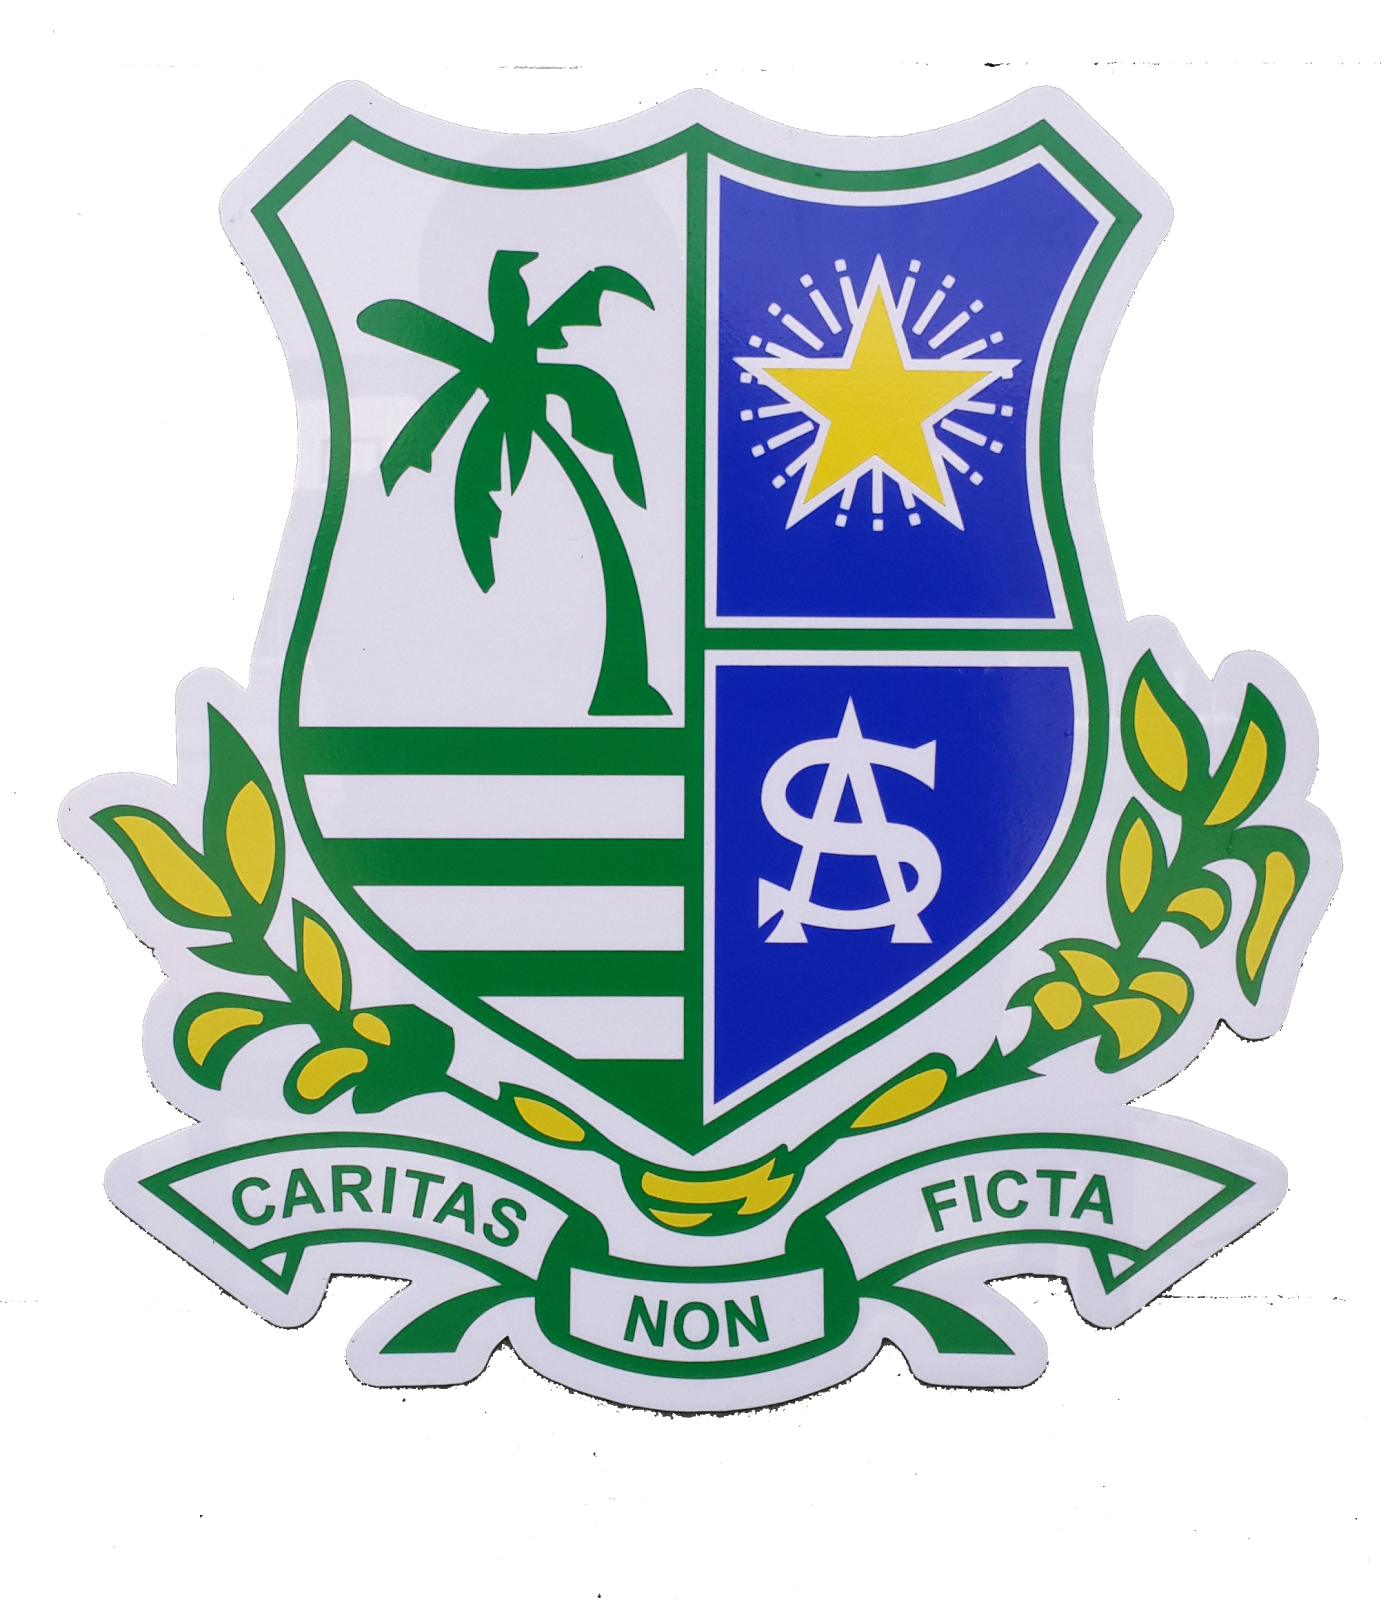 MEANING OF SCHOOL BADGE